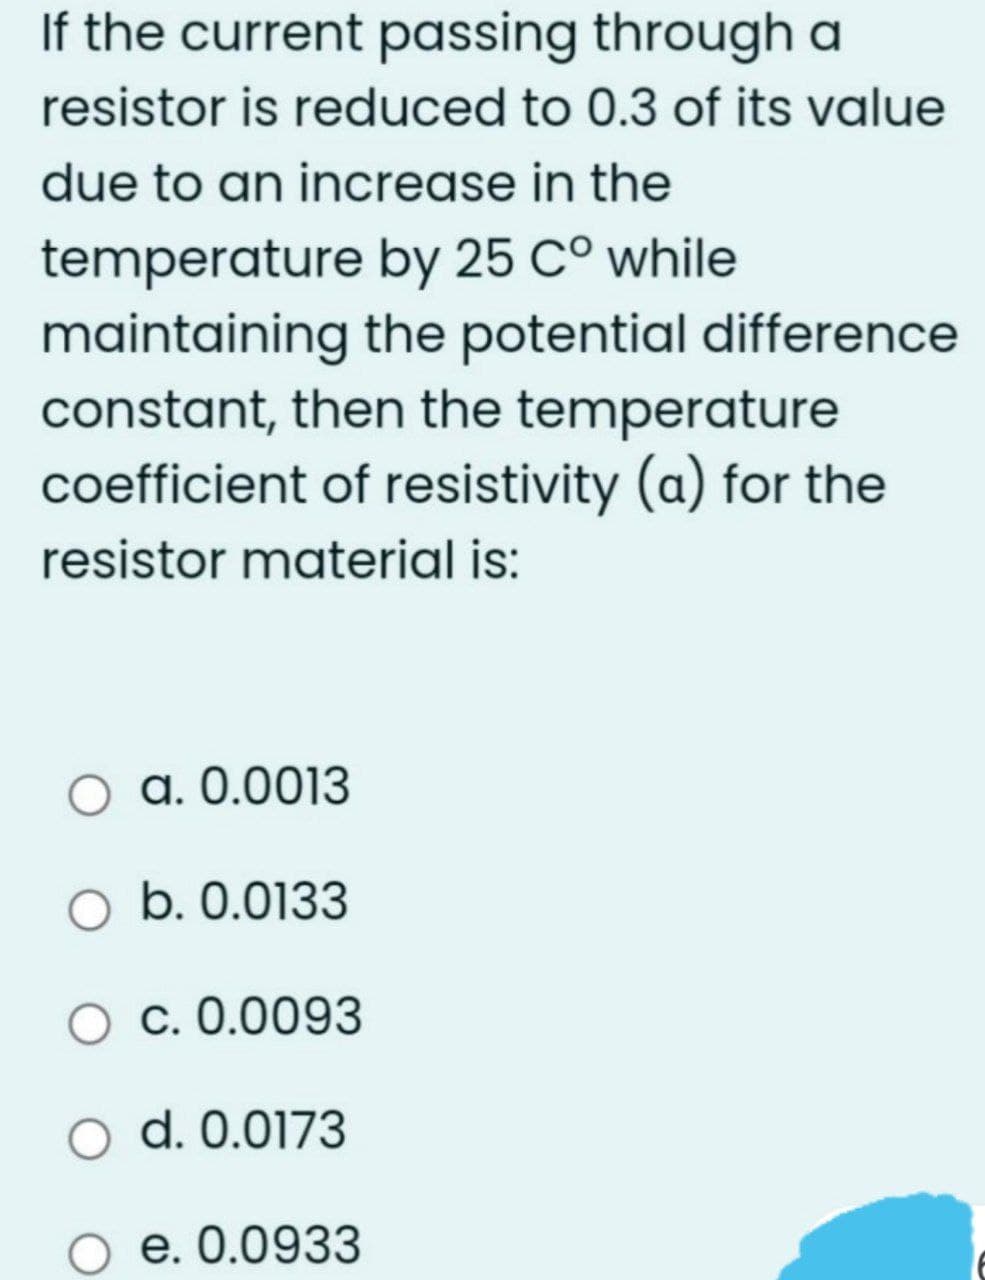 If the current passing through a
resistor is reduced to 0.3 of its value
due to an increase in the
temperature by 25 C° while
maintaining the potential difference
constant, then the temperature
coefficient of resistivity (a) for the
resistor material is:
O a. 0.0013
O b. 0.0133
O c. 0.0093
O d. 0.0173
O e. 0.0933
